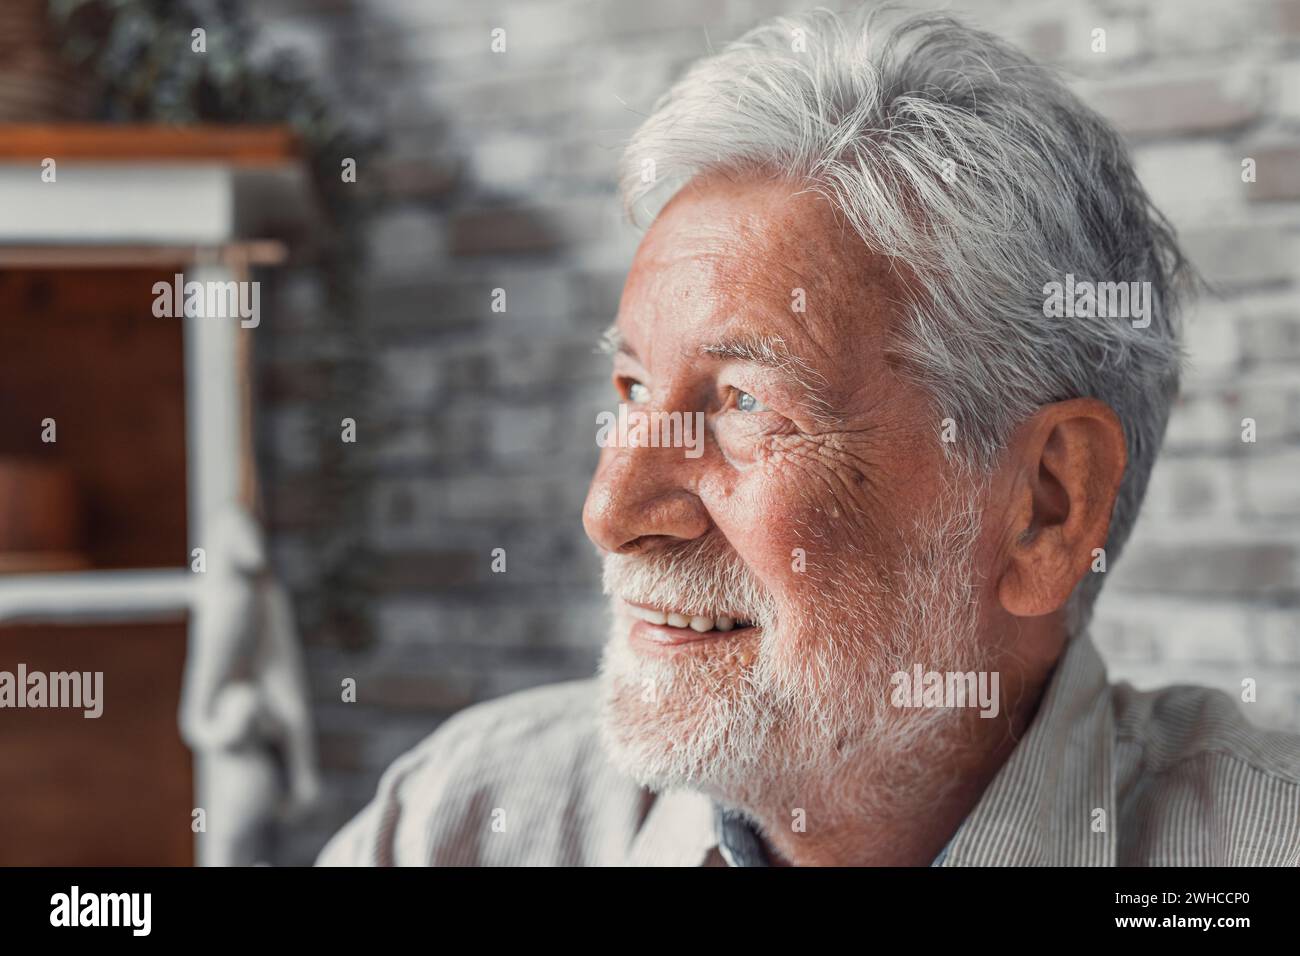 Handsome older man smiling staring at camera feels happy, close up face view. Senior advertise professional dental clinic, teeth repair and check up services, medical insurance cover for elder concept Stock Photo